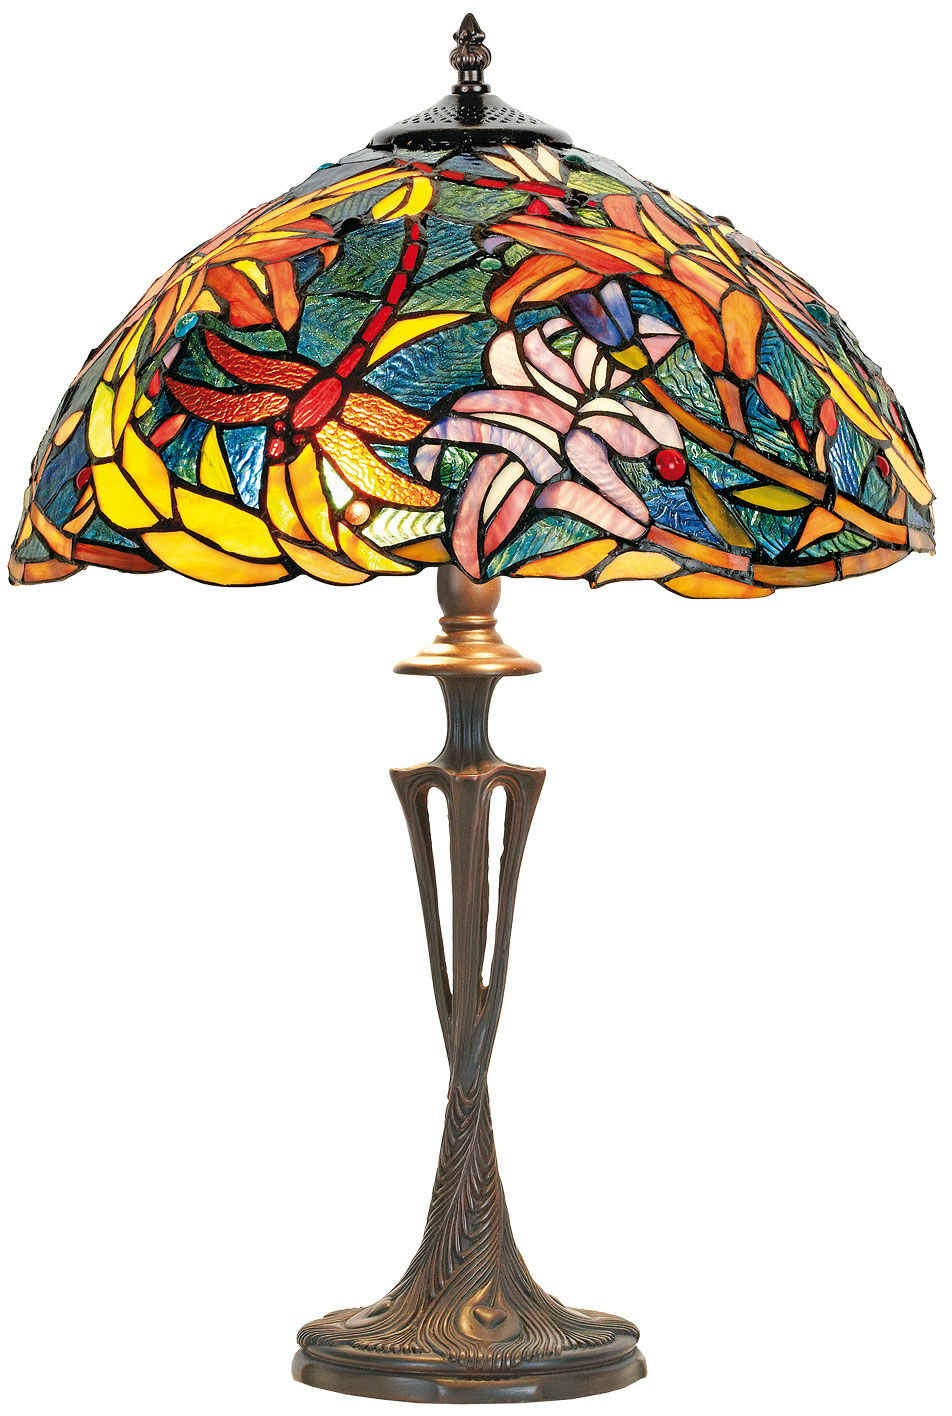 Table lamp "Emily" - after Louis C. Tiffany